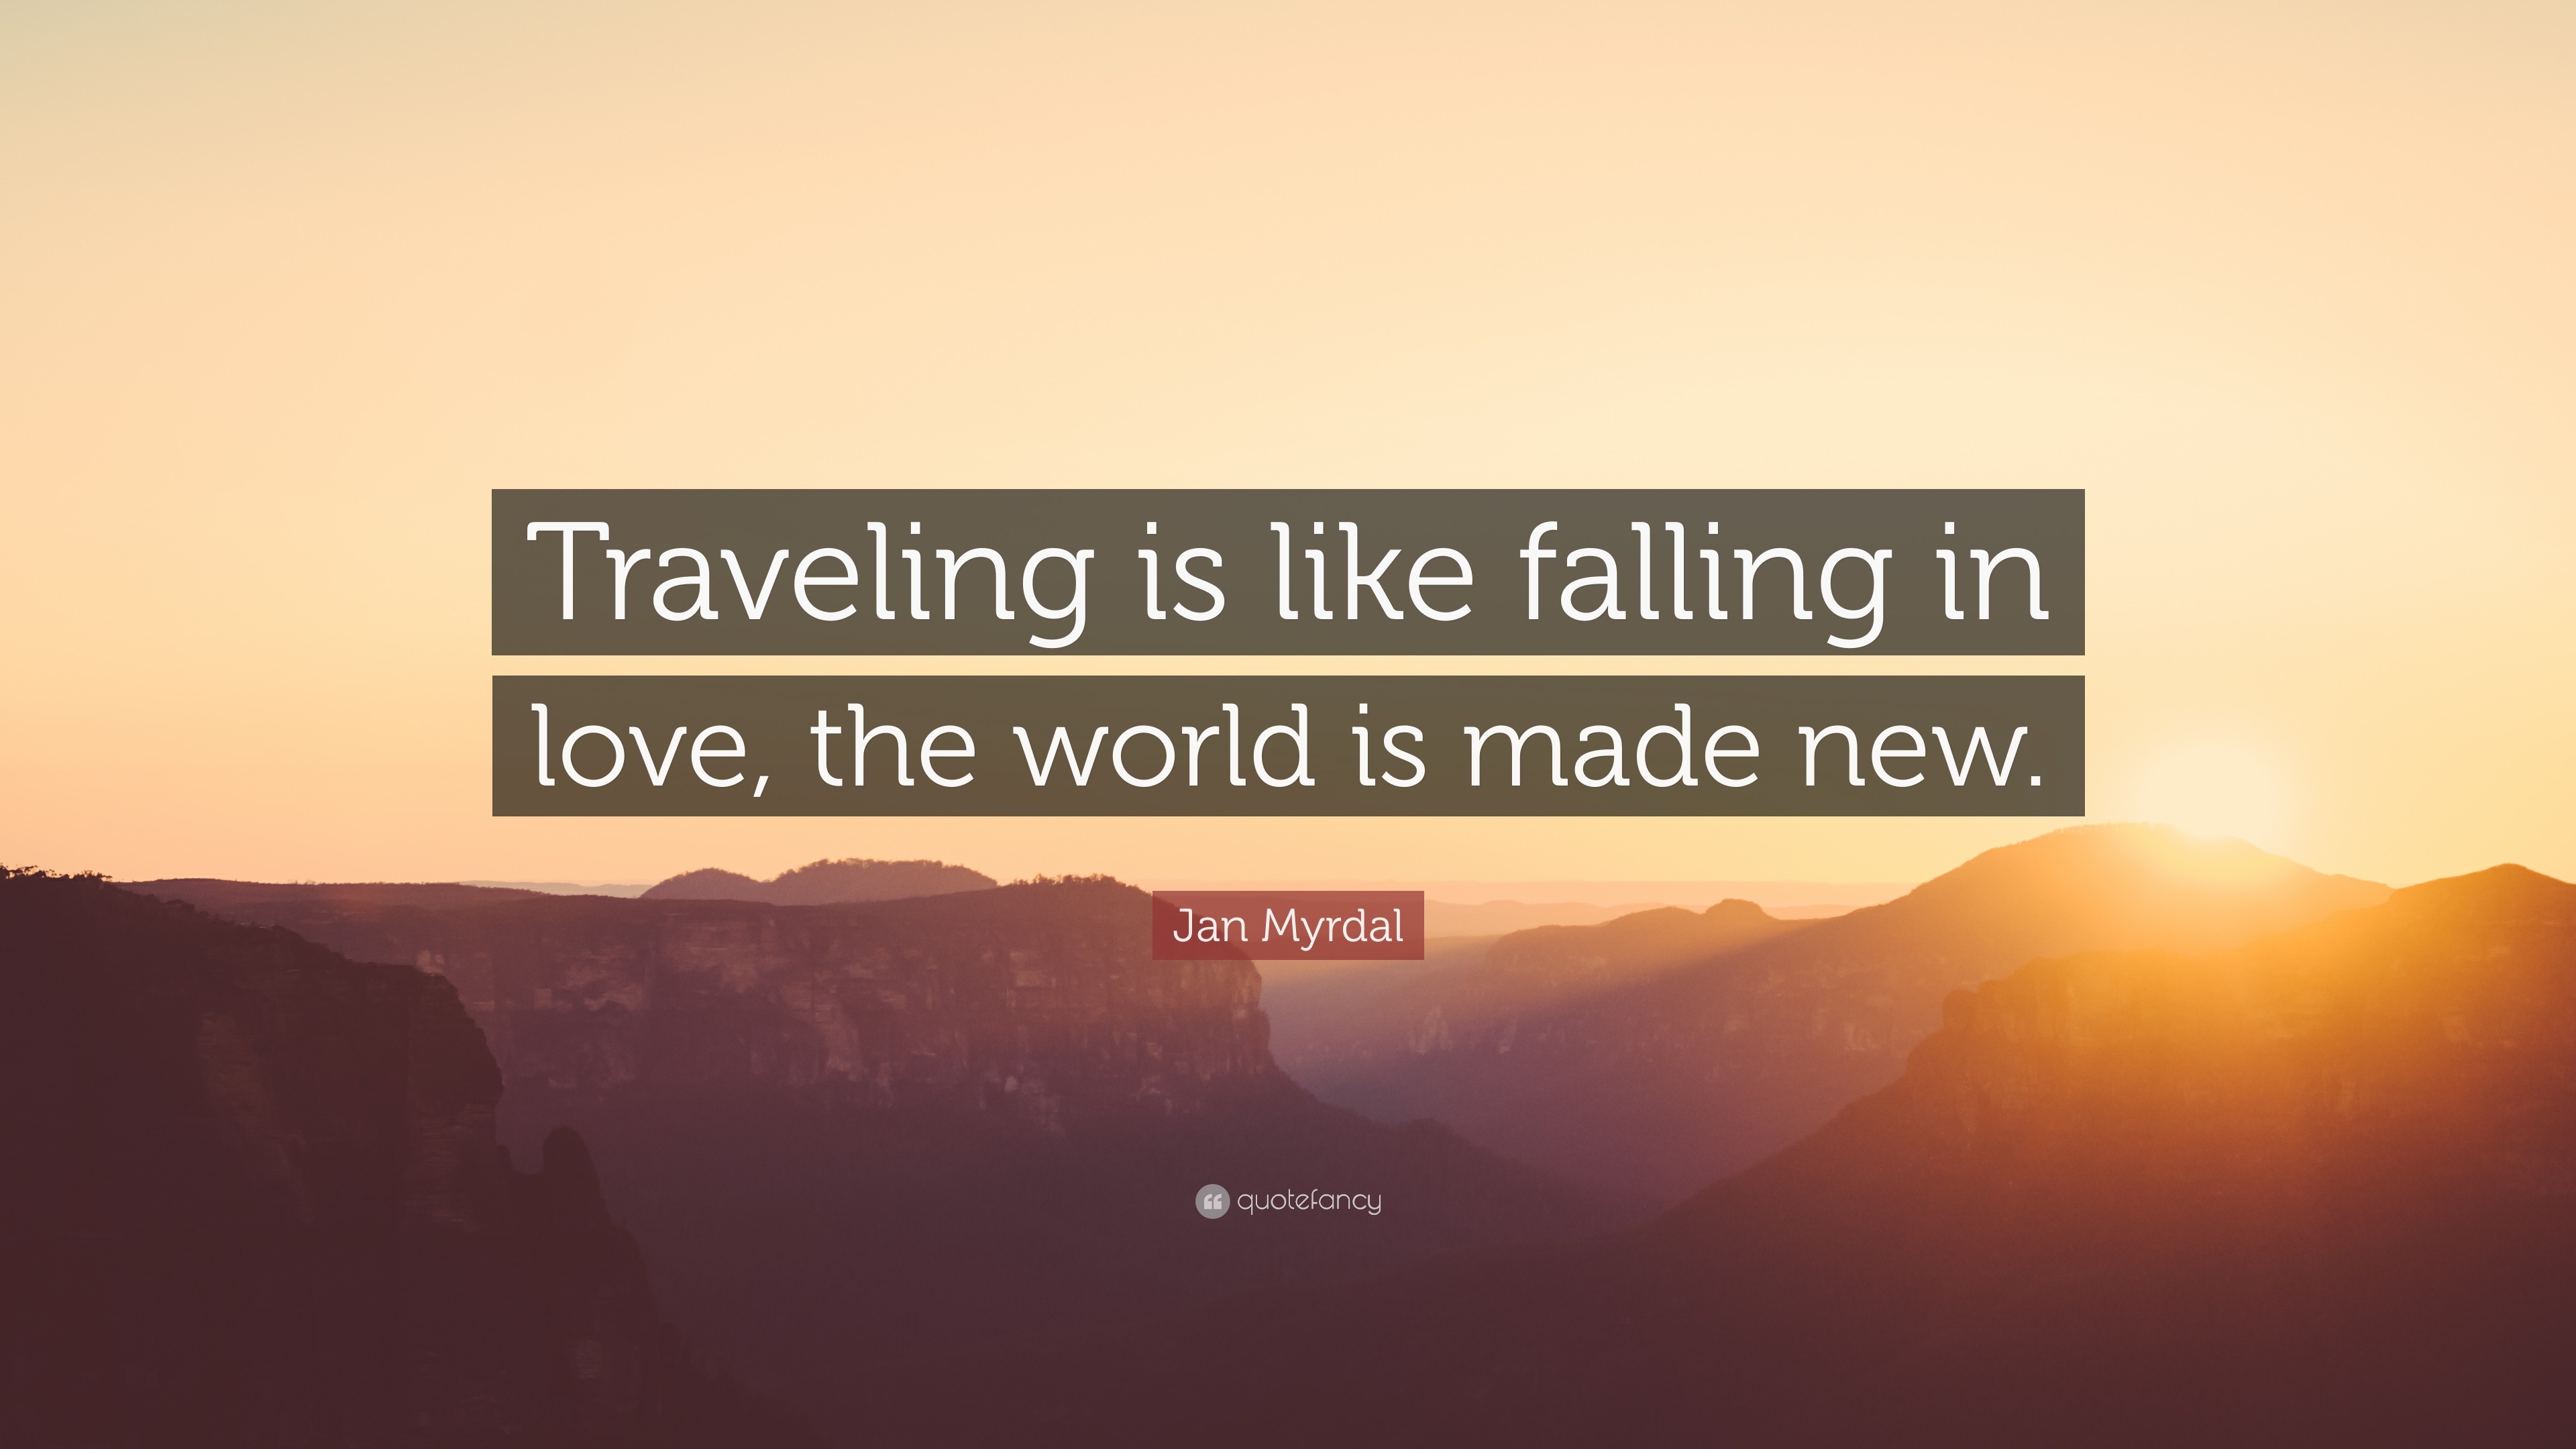 Jan Myrdal Quote “Traveling is like falling in love the world is made